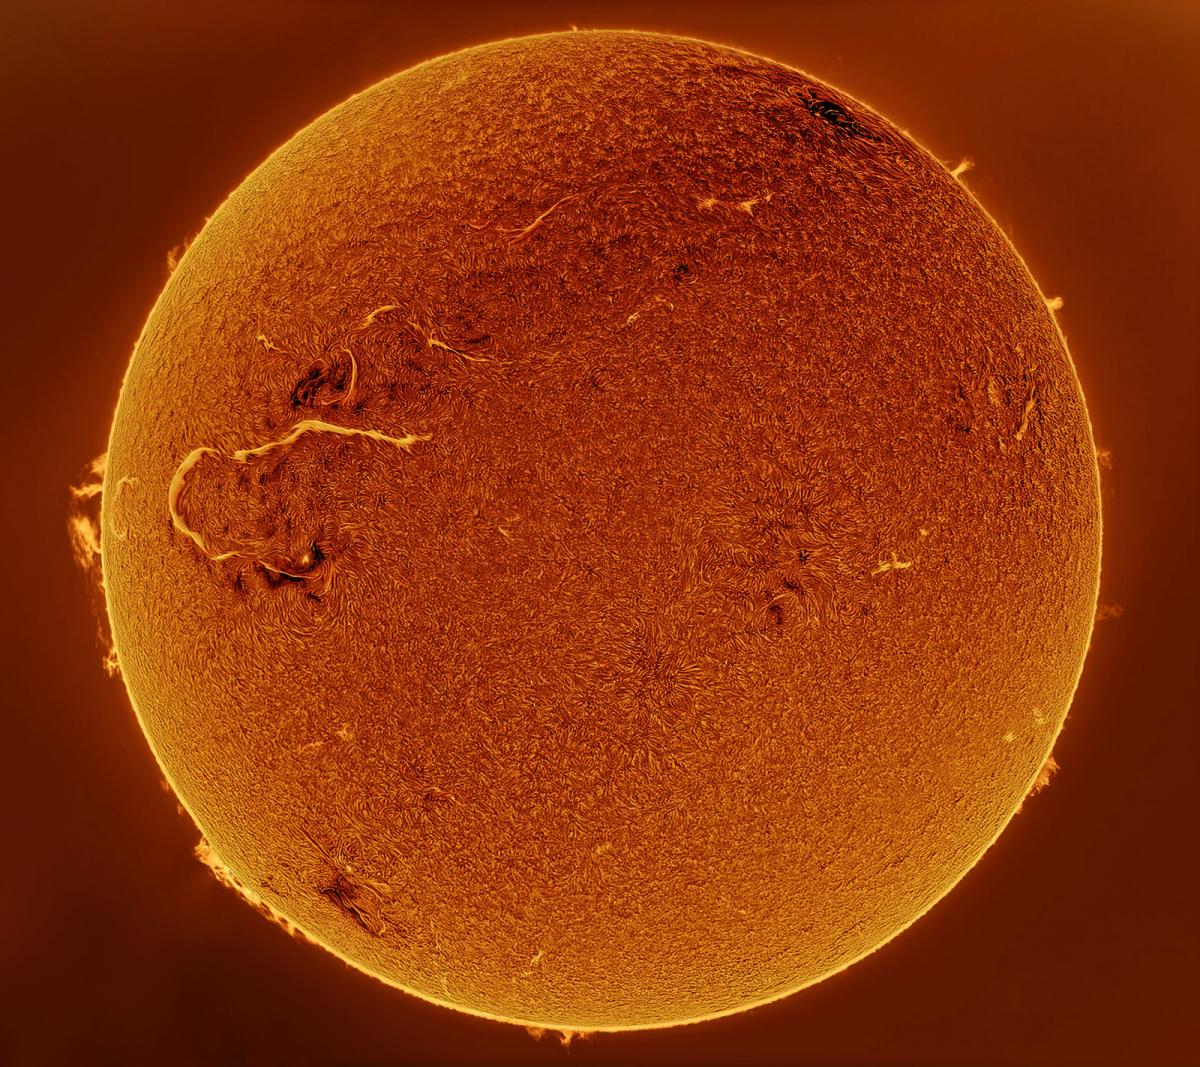 Astronomy photograph of the Sun depicting a big golden ball with orange darker elements